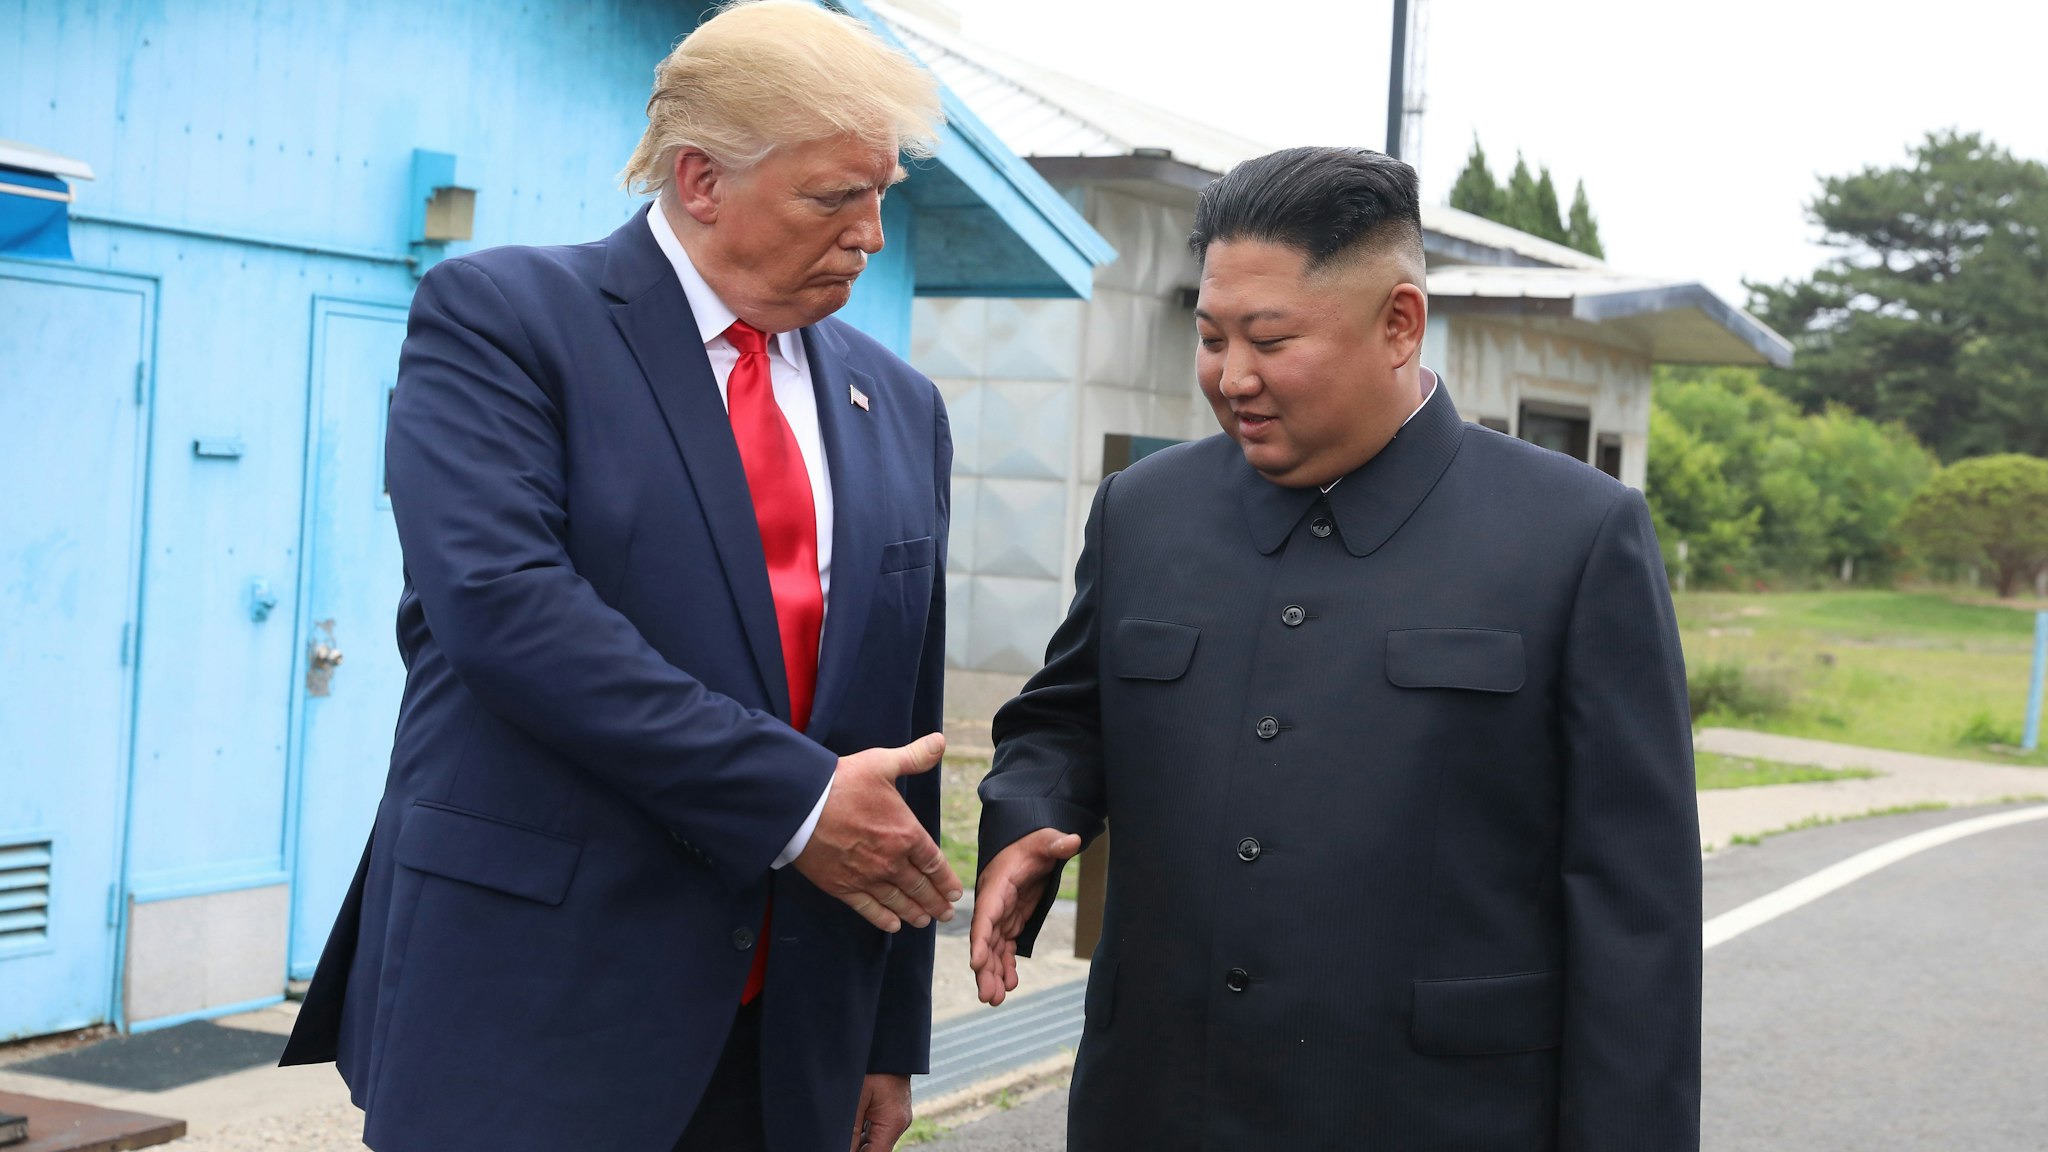 PANMUNJOM, SOUTH KOREA - JUNE 30 (SOUTH KOREA OUT): A handout photo provided by Dong-A Ilbo of North Korean leader Kim Jong Un and U.S. President Donald Trump inside the demilitarized zone (DMZ) separating the South and North Korea on June 30, 2019 in Panmunjom, South Korea. U.S. President Donald Trump and North Korean leader Kim Jong-un briefly met at the Korean demilitarized zone (DMZ) on Sunday, with an intention to revitalize stalled nuclear talks and demonstrate the friendship between both countries. The encounter was the third time Trump and Kim have gotten together in person as both leaders have said they are committed to the "complete denuclearization" of the Korean peninsula. (Handout photo by Dong-A Ilbo via Getty Images/Getty Images)